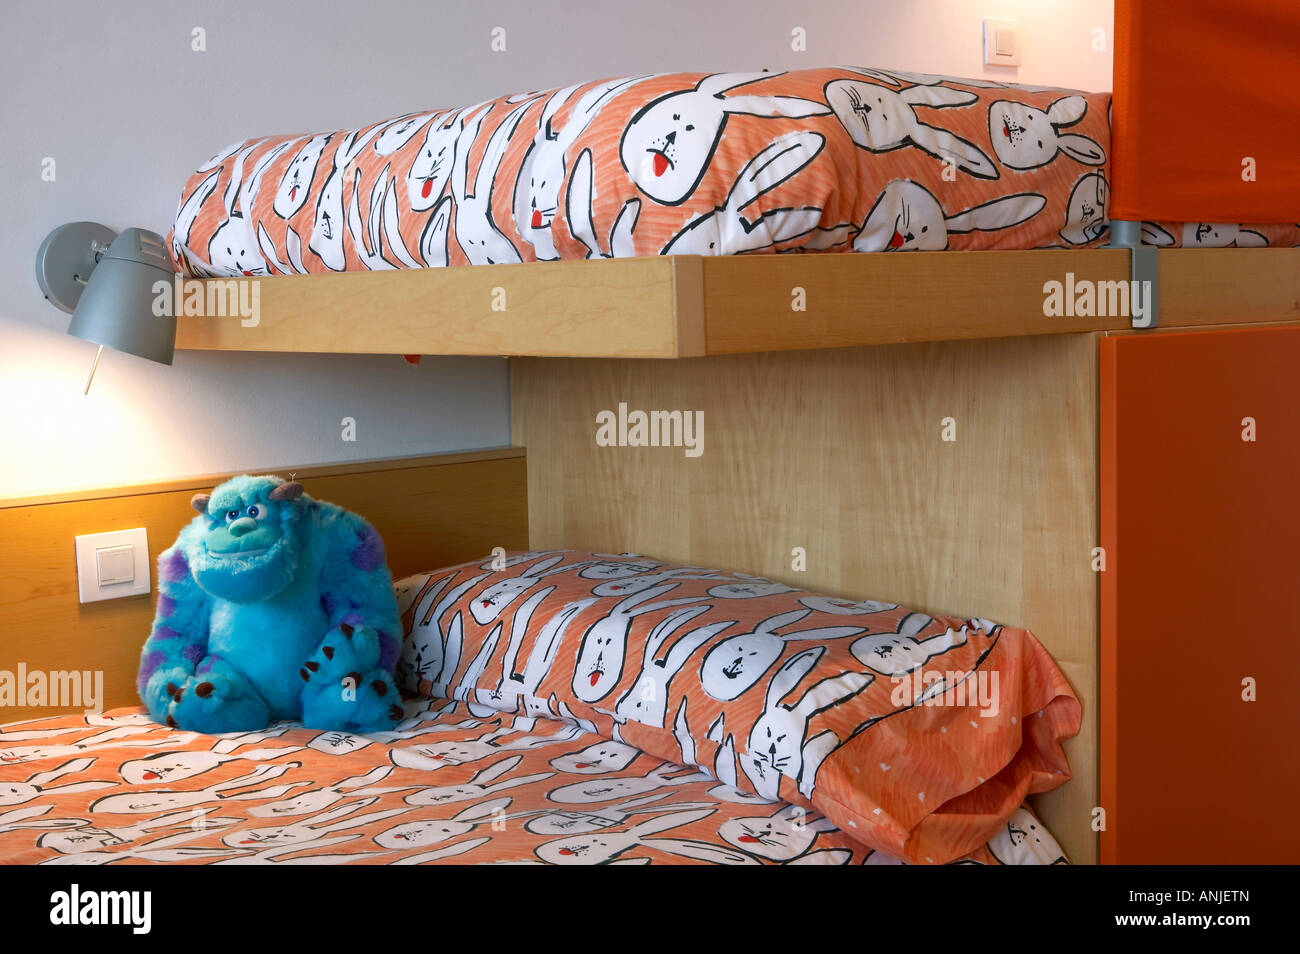 Children s room with stuffed toy on bed Stock Photo